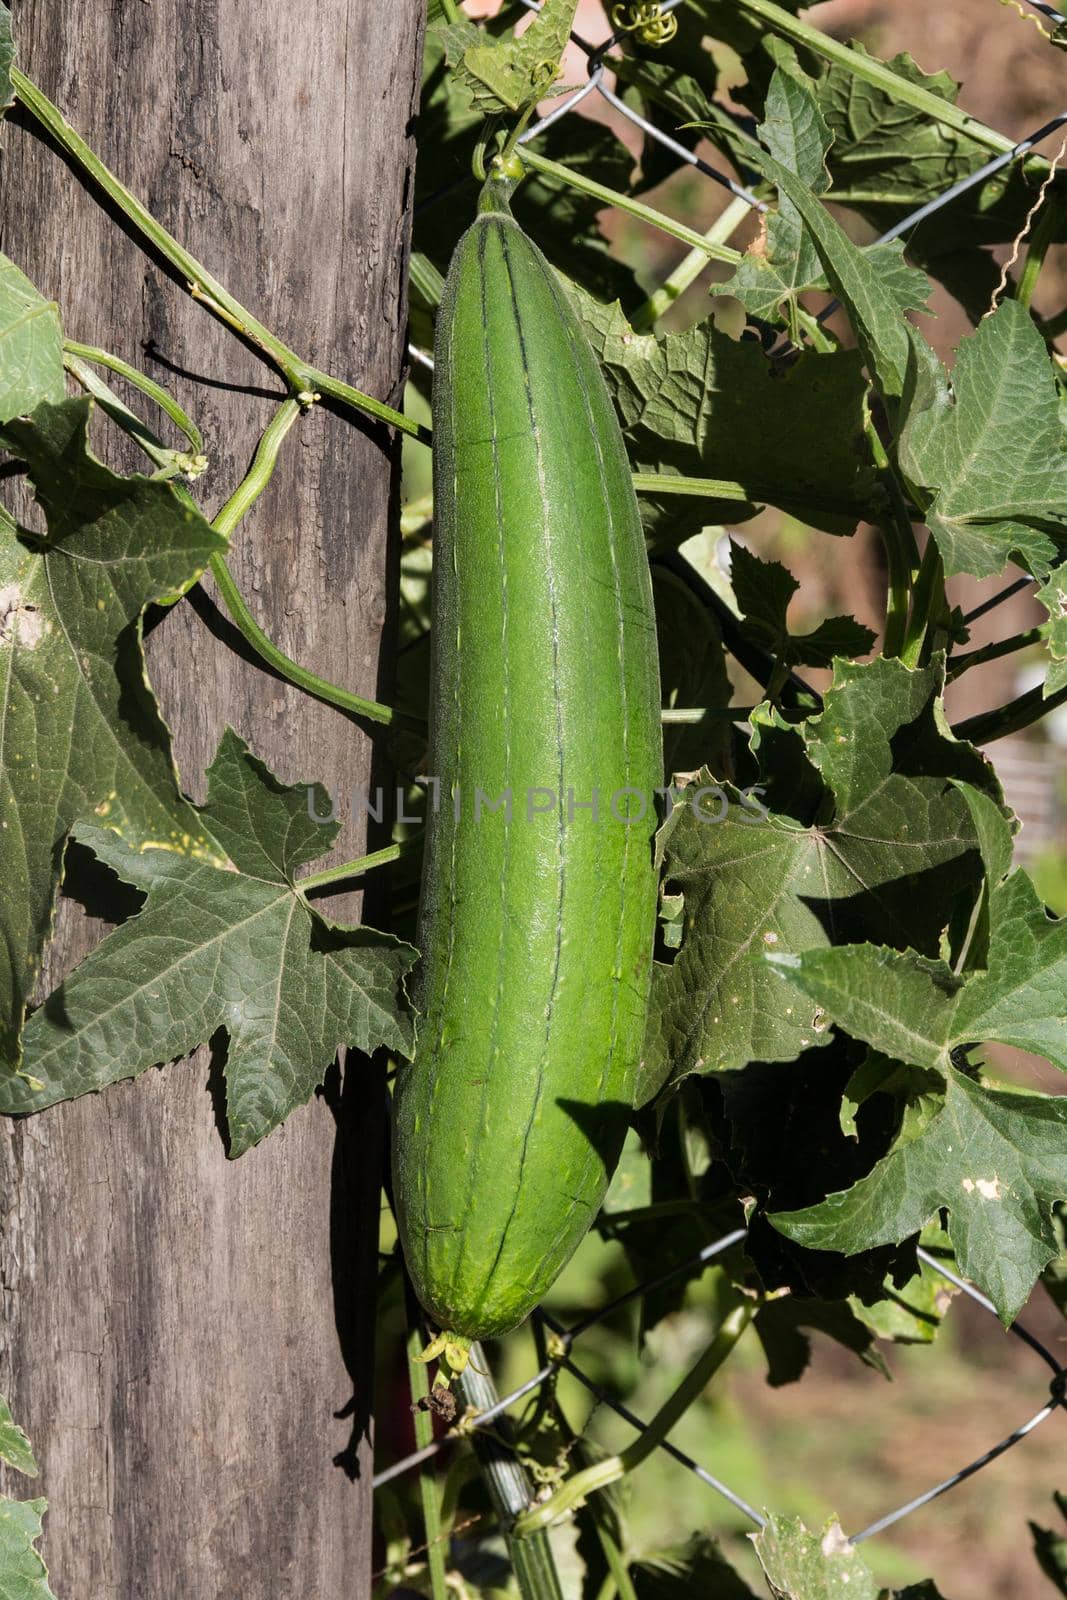 immature luffa fruits to eat in the garden fence by GabrielaBertolini